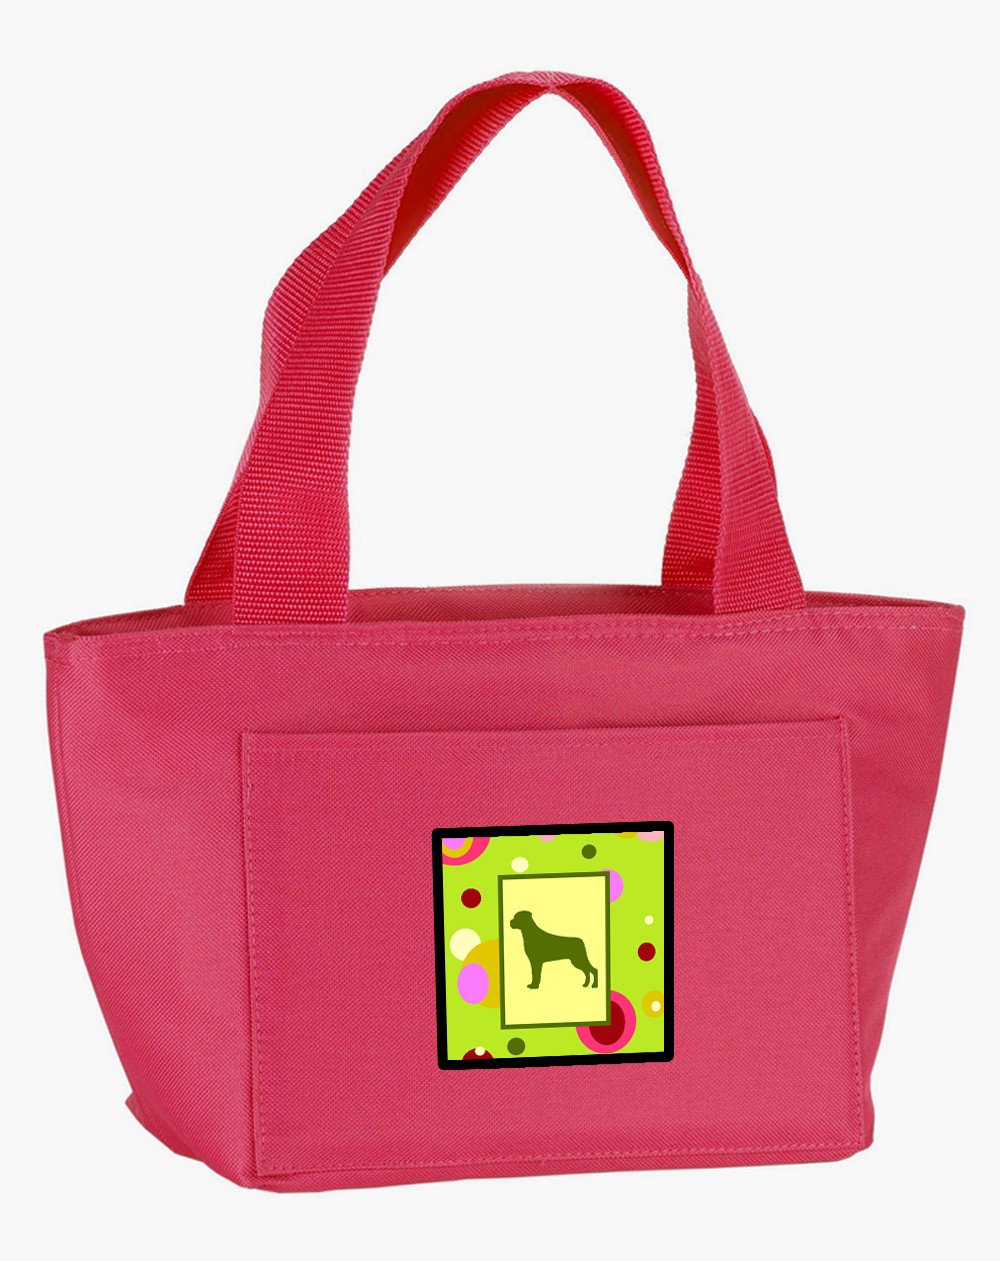 Lime Green Dots Rottweiler Lunch Bag CK1091PK-8808 by Caroline's Treasures